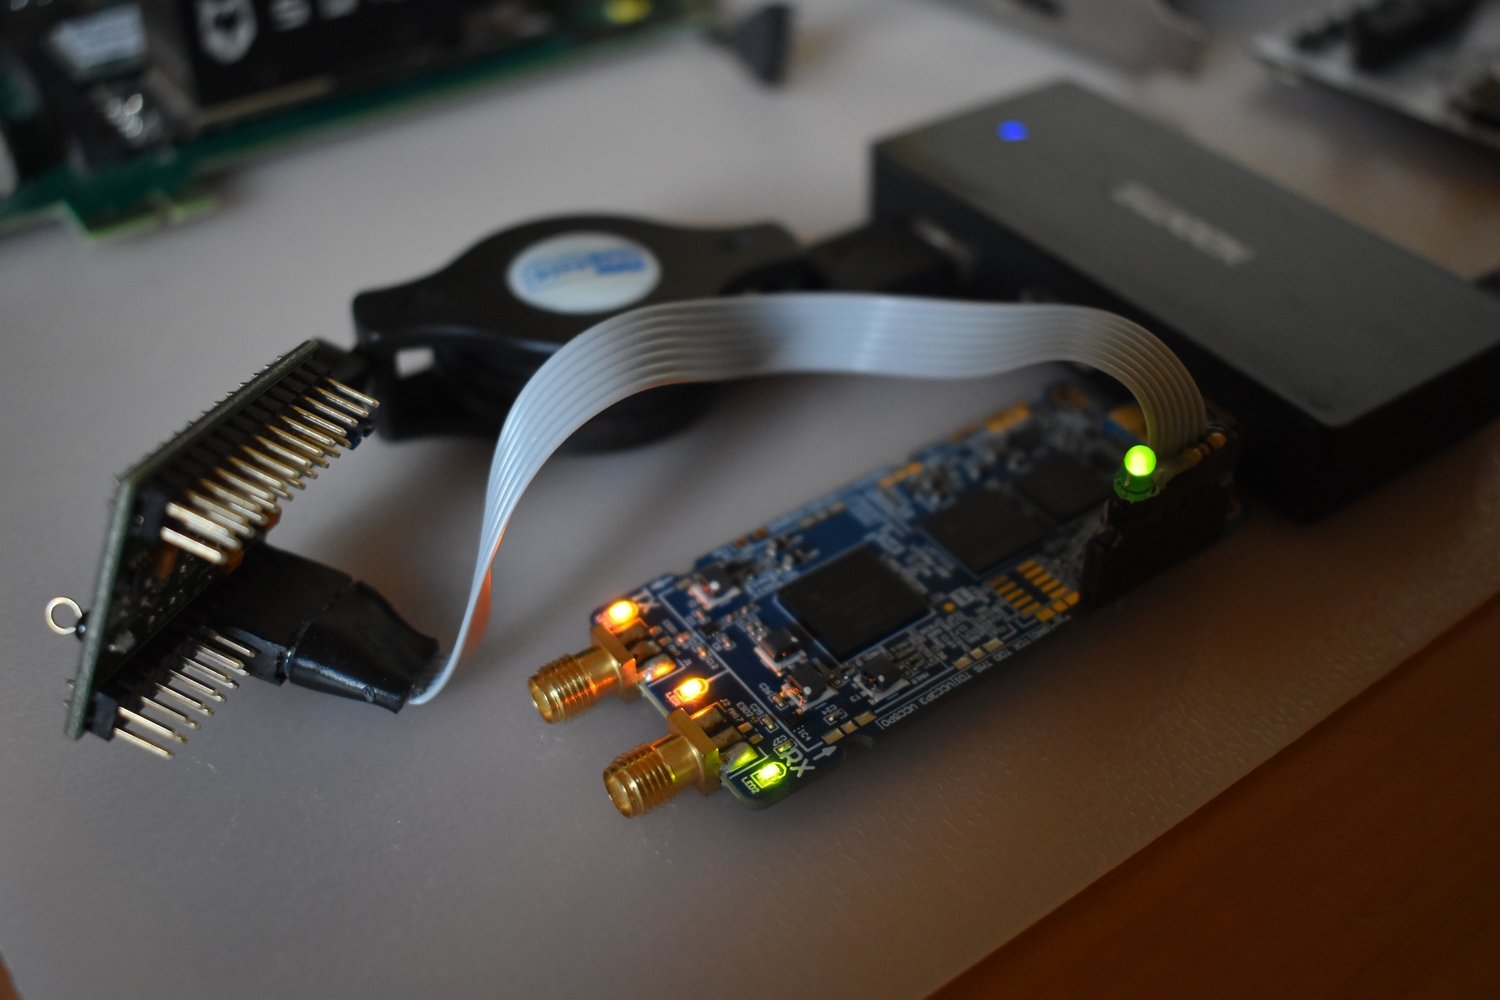 LimeSDR Mini 2.0 connected to a JTAG cable